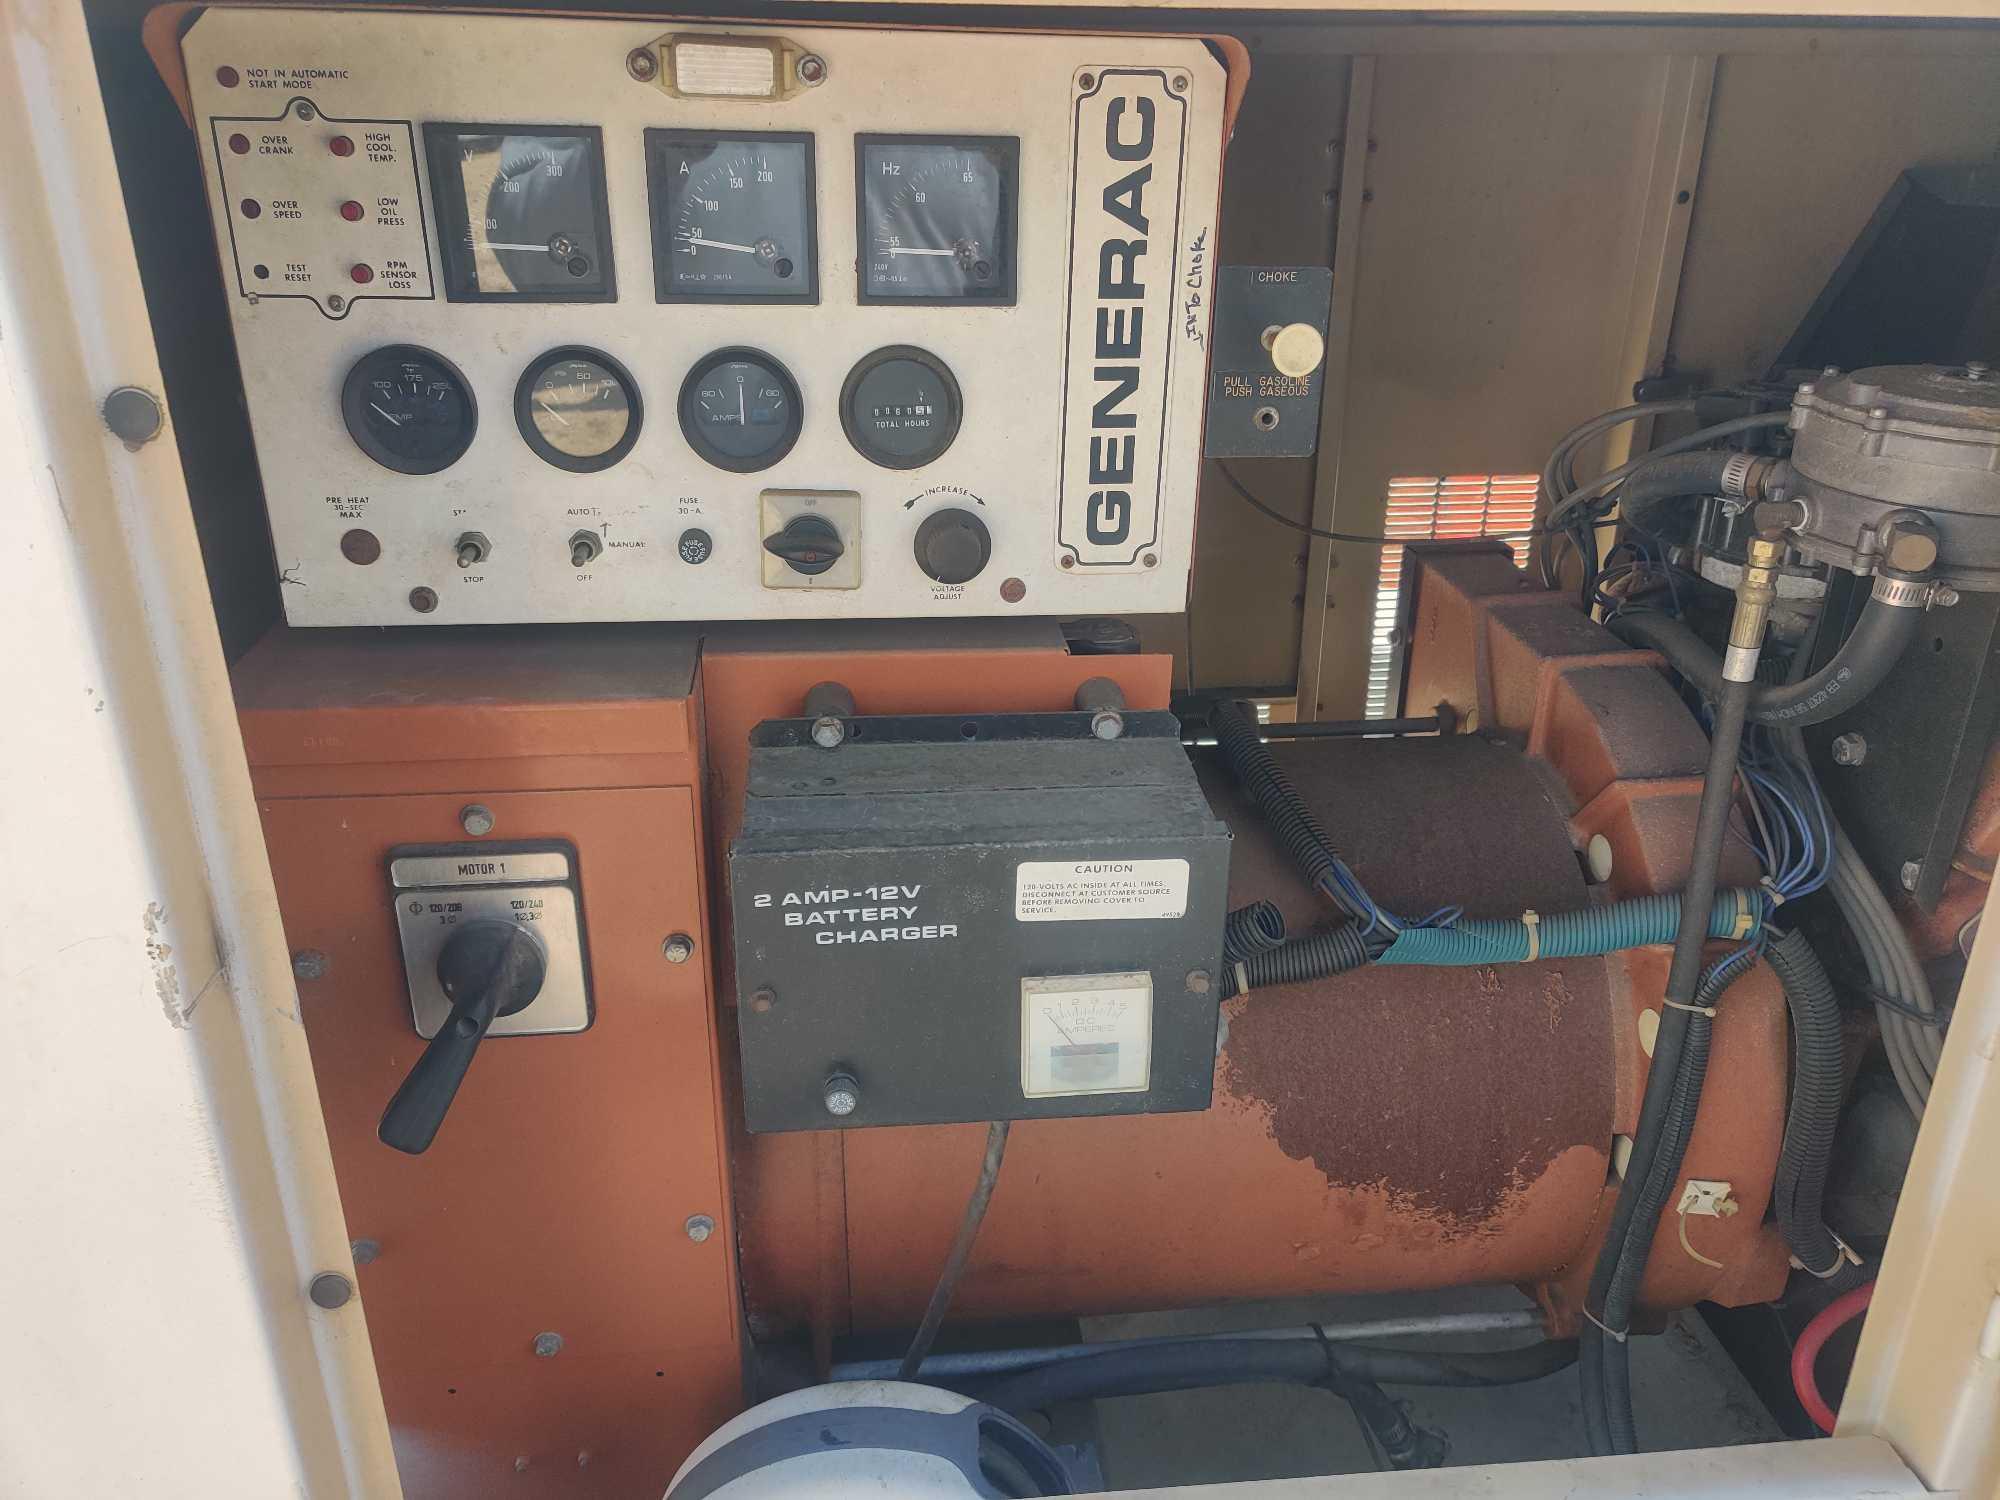 GENERAC 50KW GENERATOR SN:890206 powered by 5.7L gas engine, equipped with 50KW, selector switch,